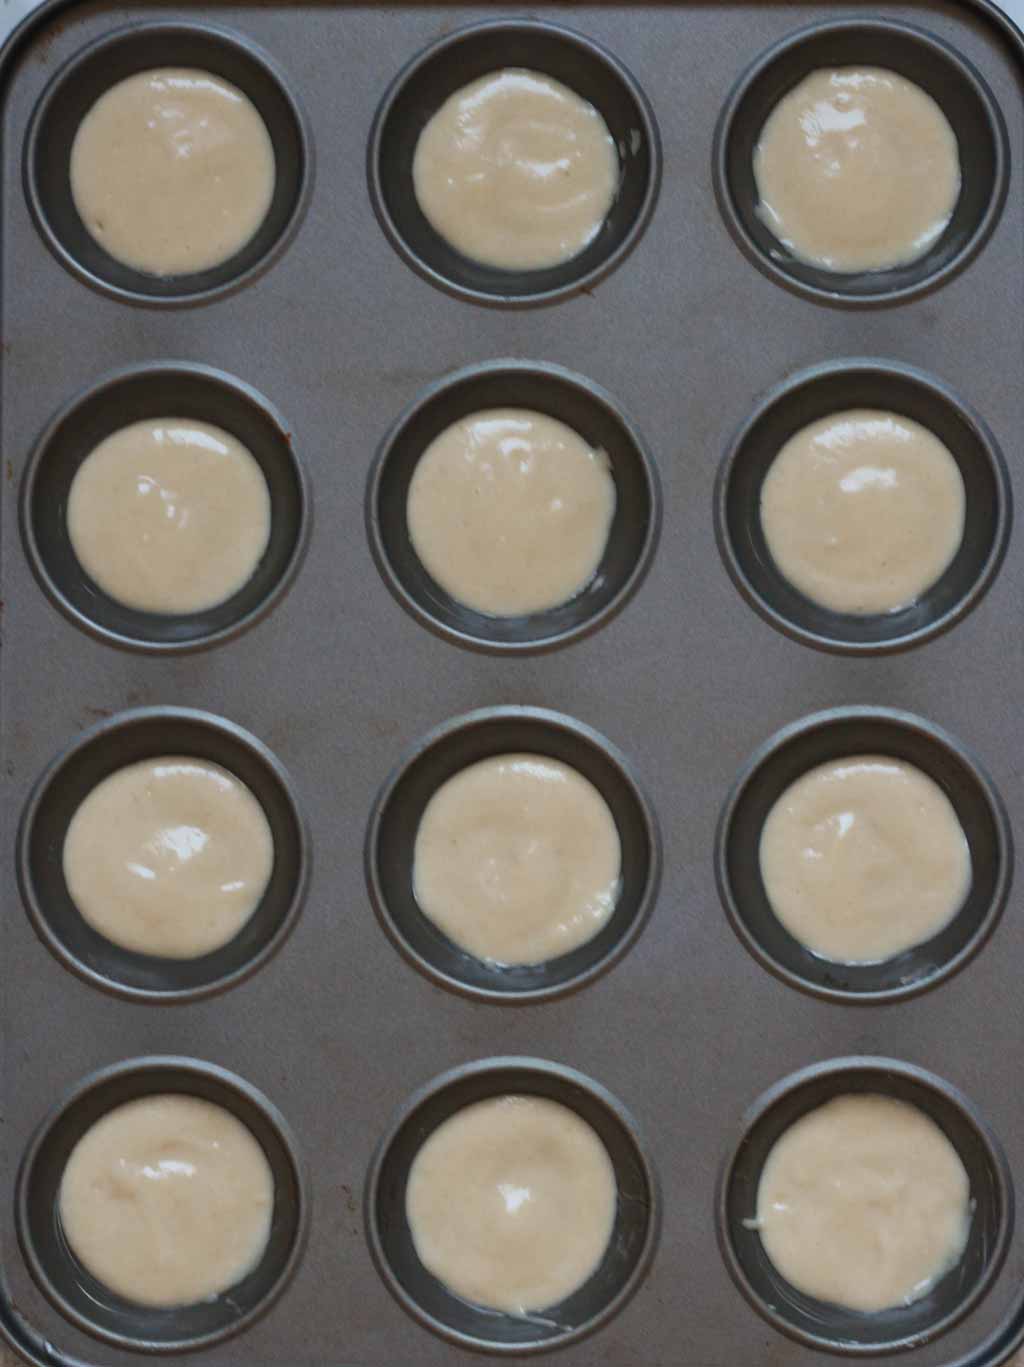 A Cupcake Tin Filled With A Small Amount Of Cake Batter